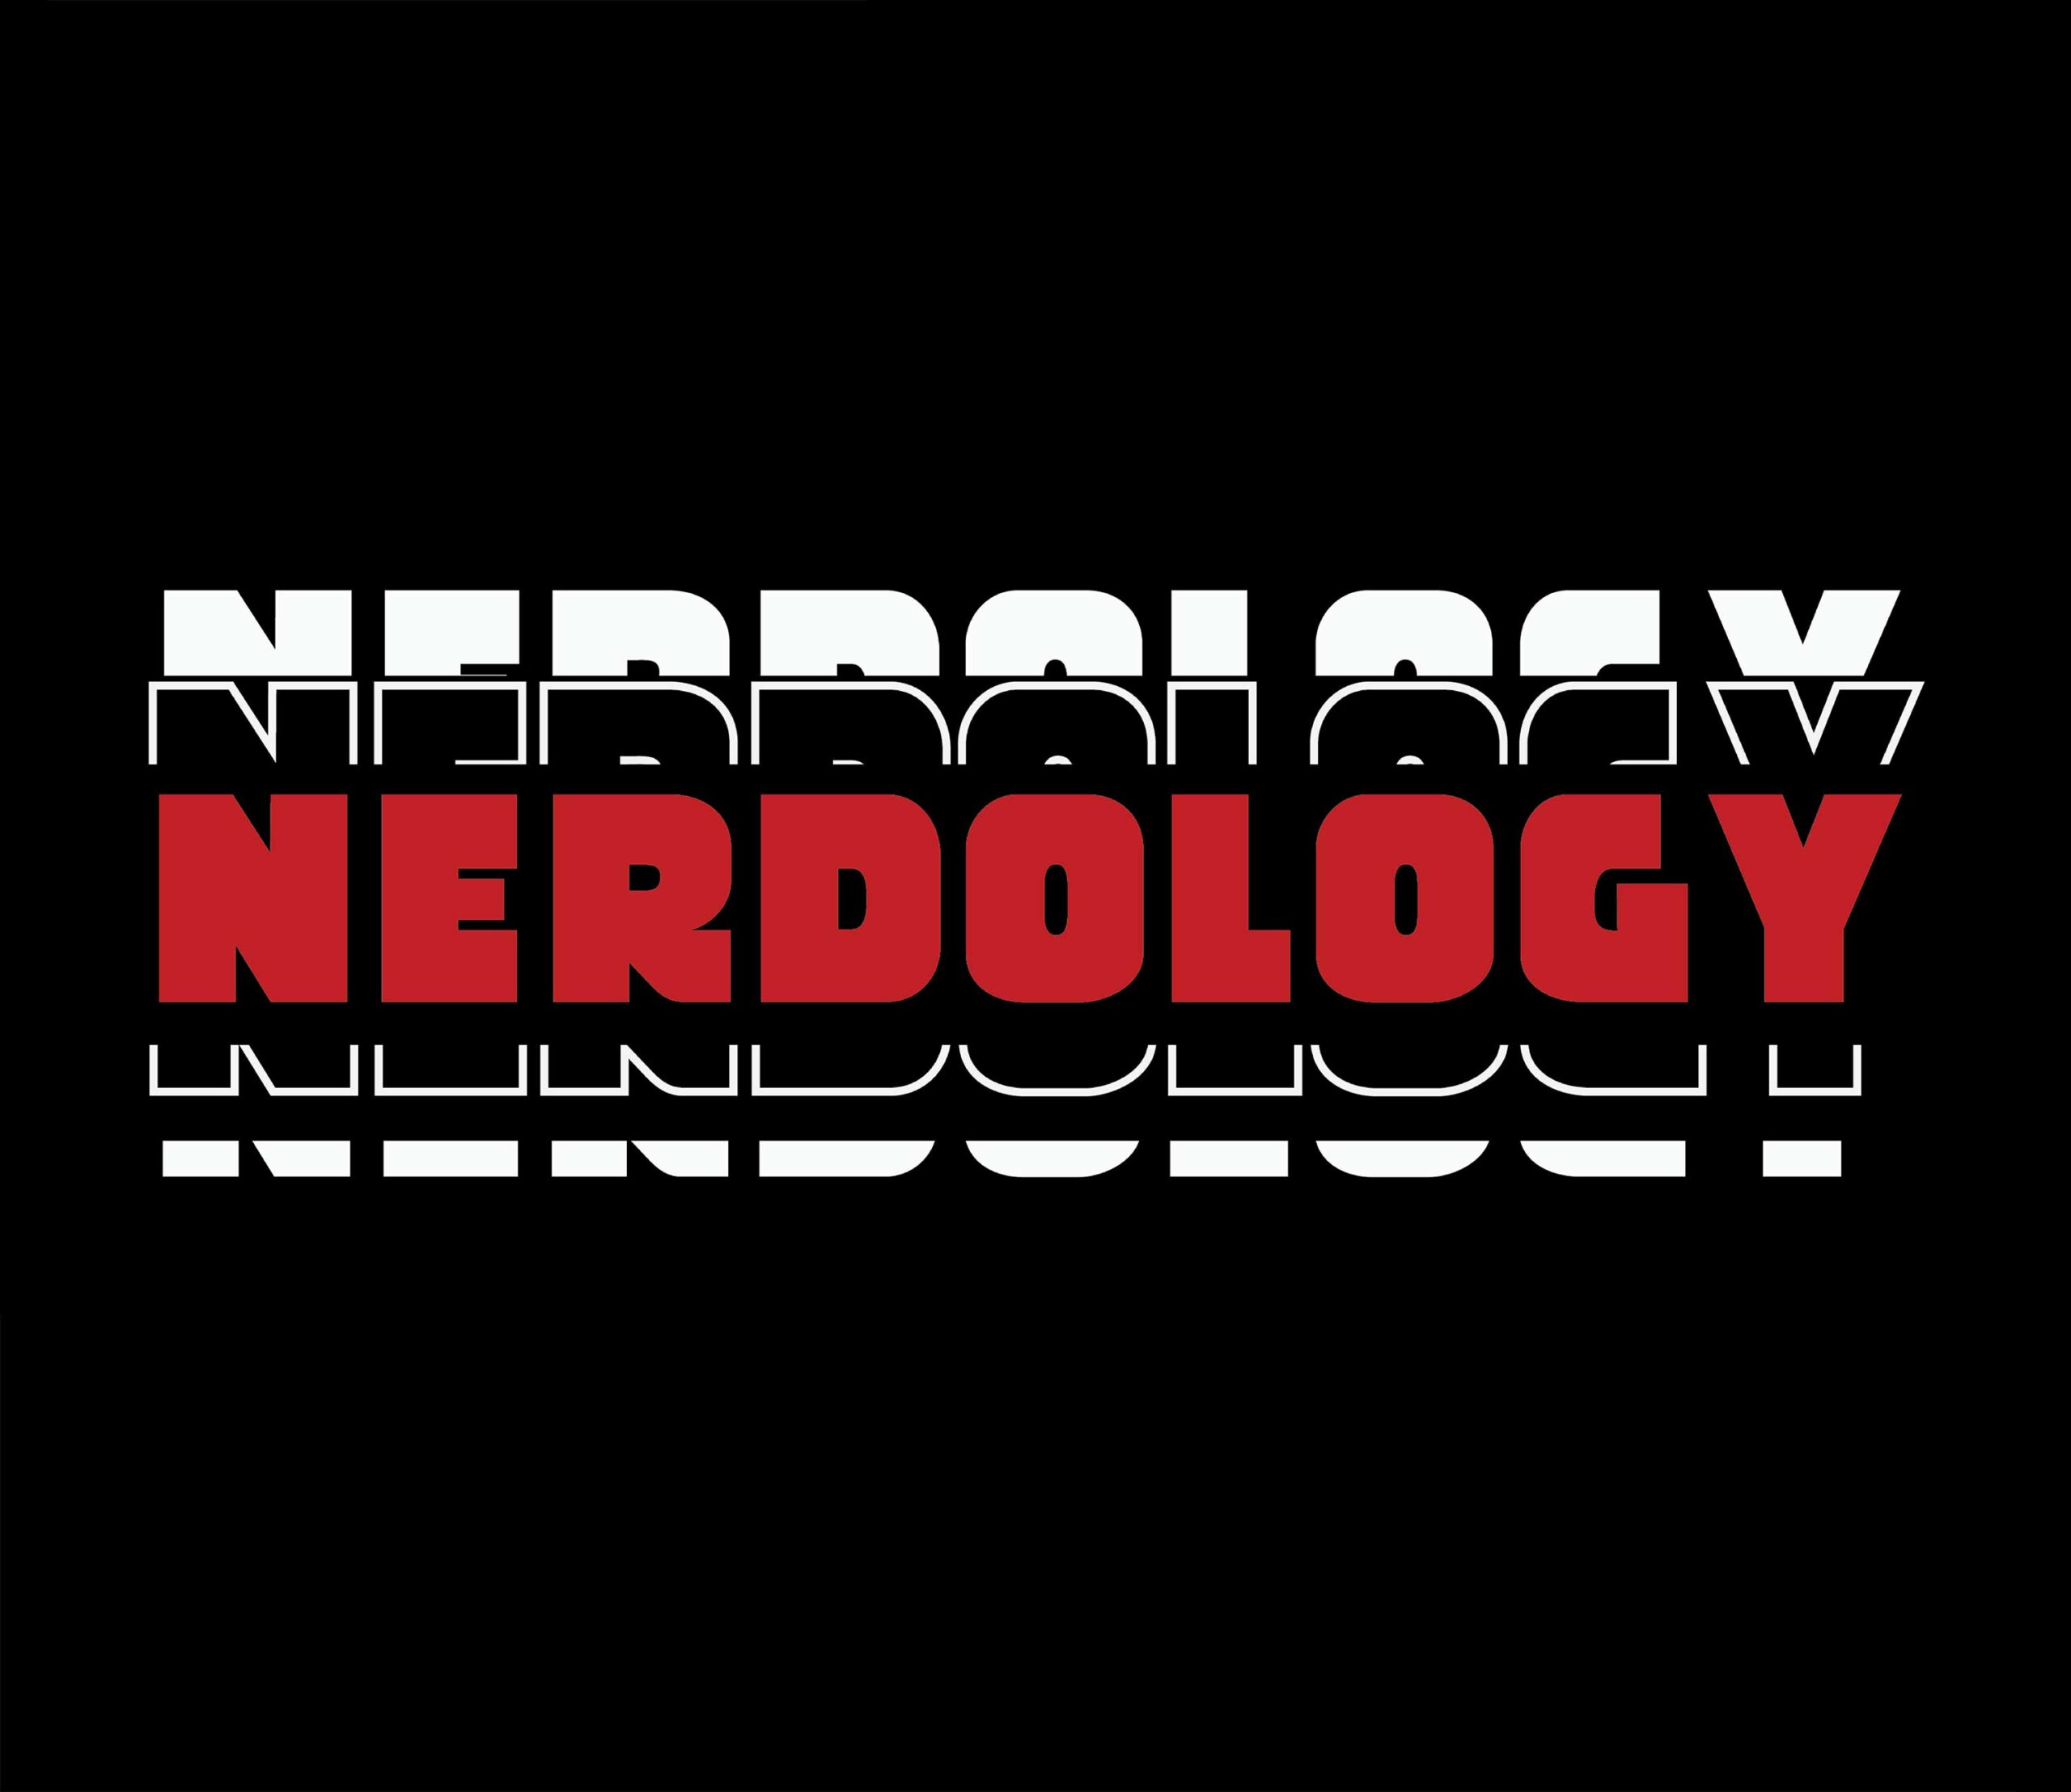 Nerdology in red lettering with white outlines on a black background.